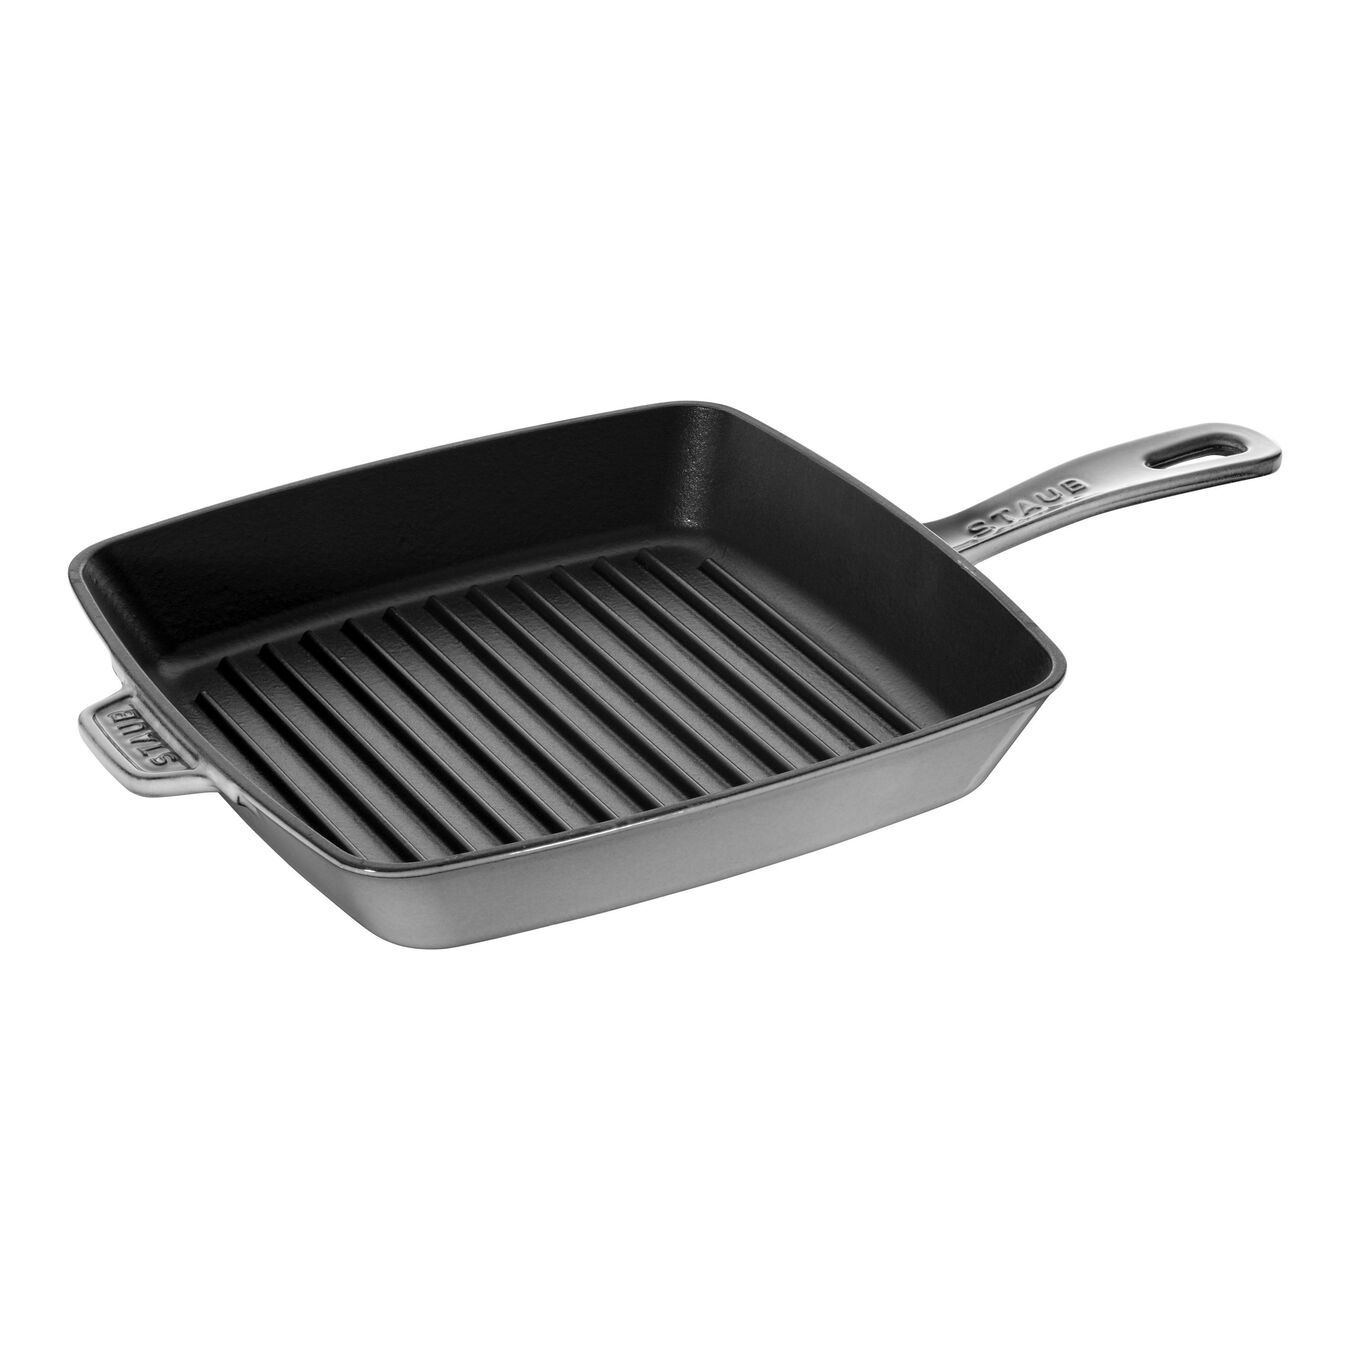 10-inch, cast iron, square, Grill Pan, graphite grey,,large 1